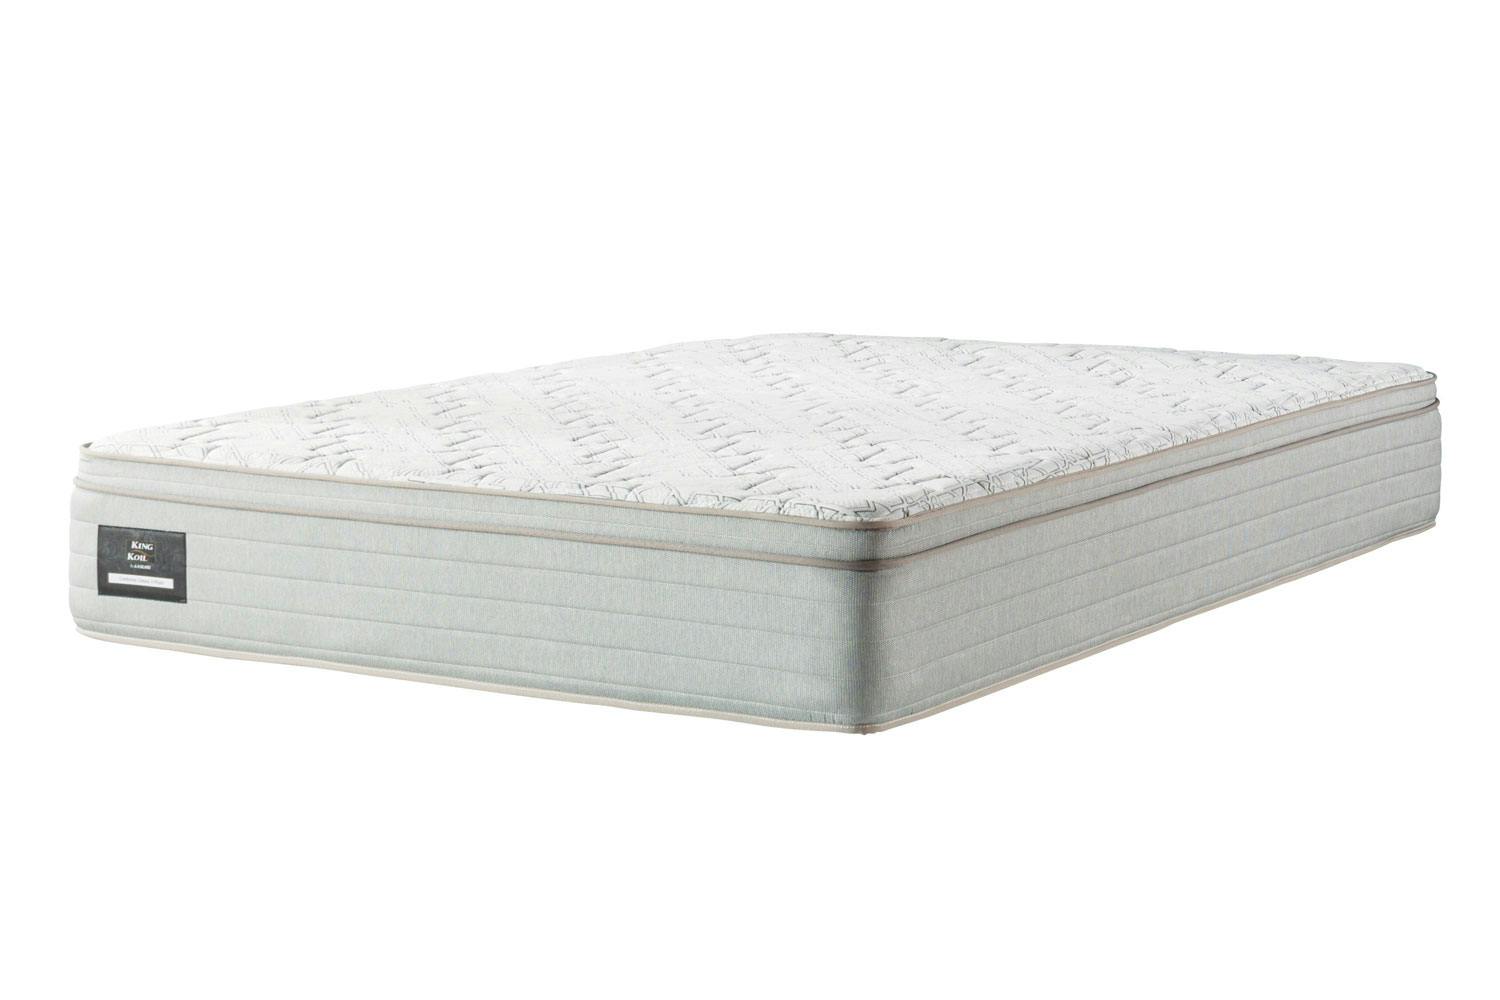 Conforma Classic II Soft Queen Mattress by King Koil